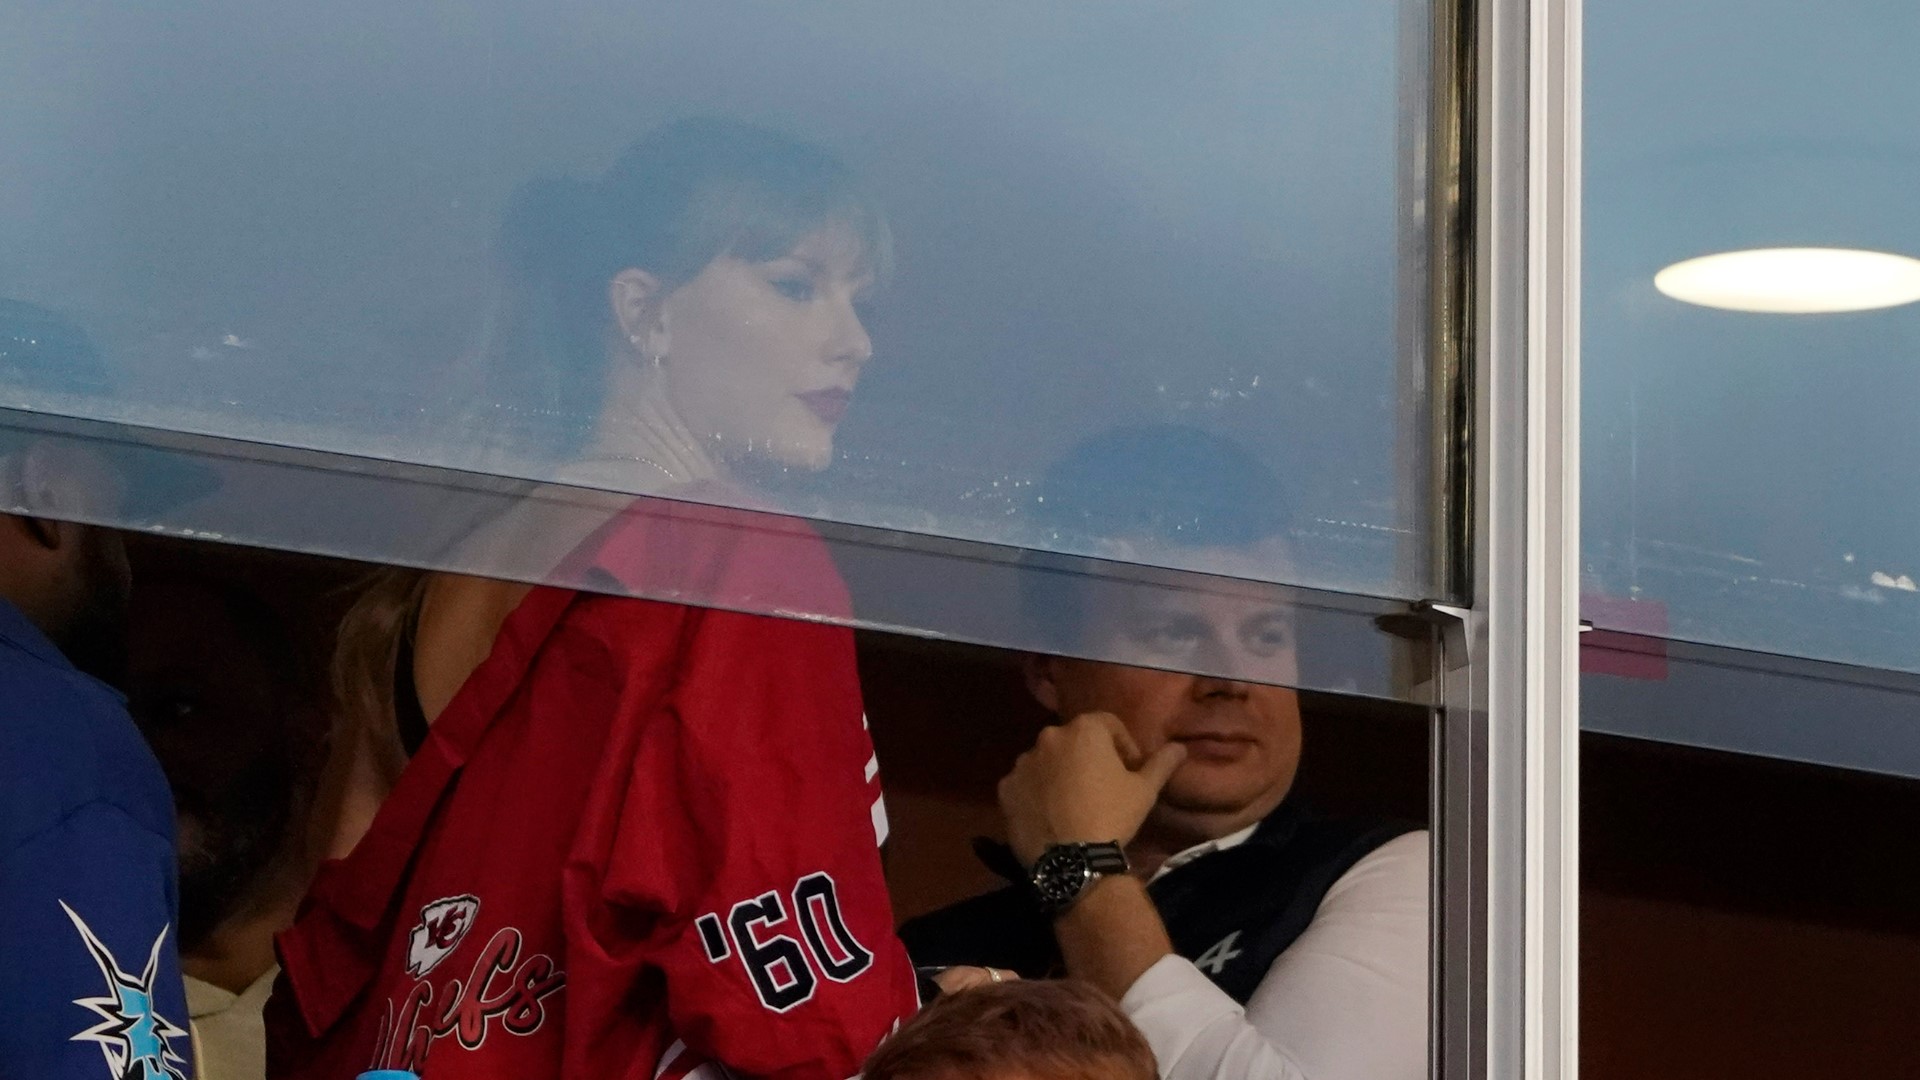 Thursday night's game was the third that Swift has attended in four weeks.